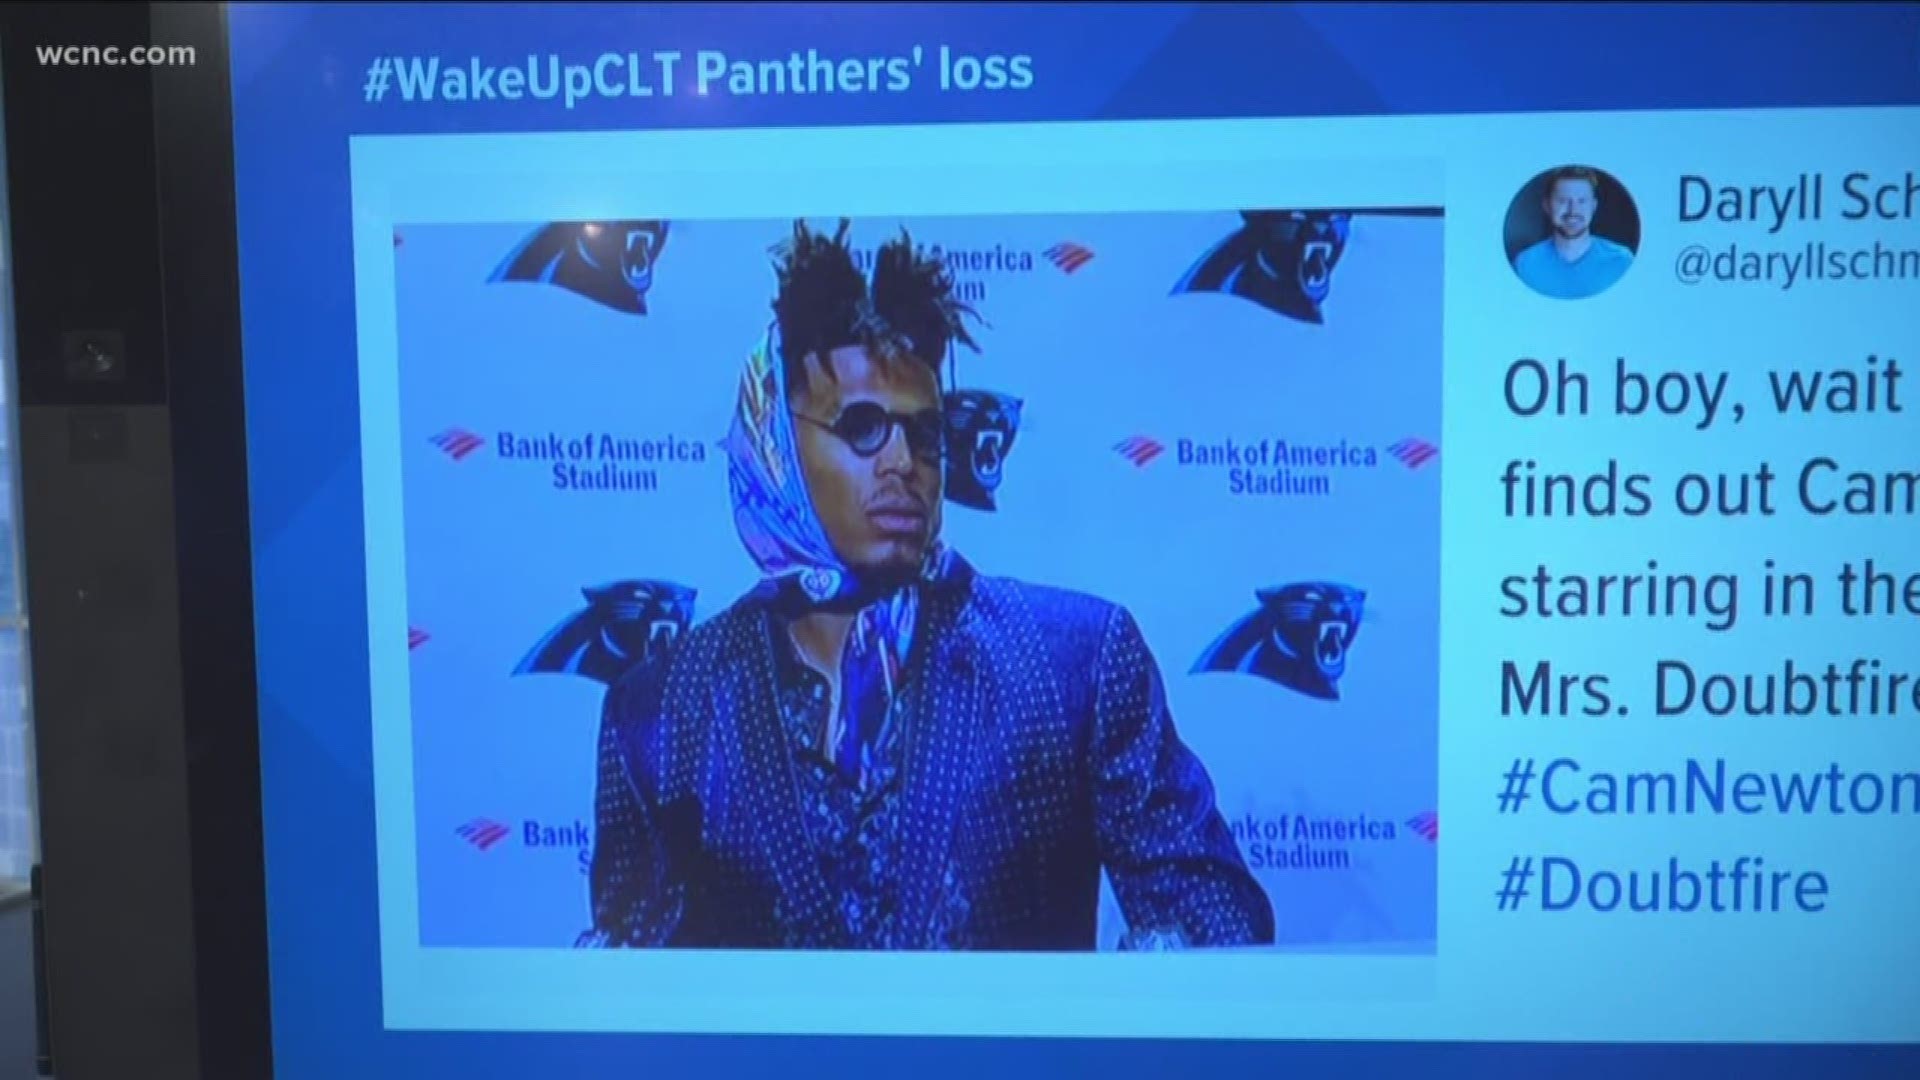 Panthers fans are sulking after Thursday night's disappointing loss to the Tampa Bay Buccaneers. But some fans are staying positive, hopeful the team will get things together in time to save their season.